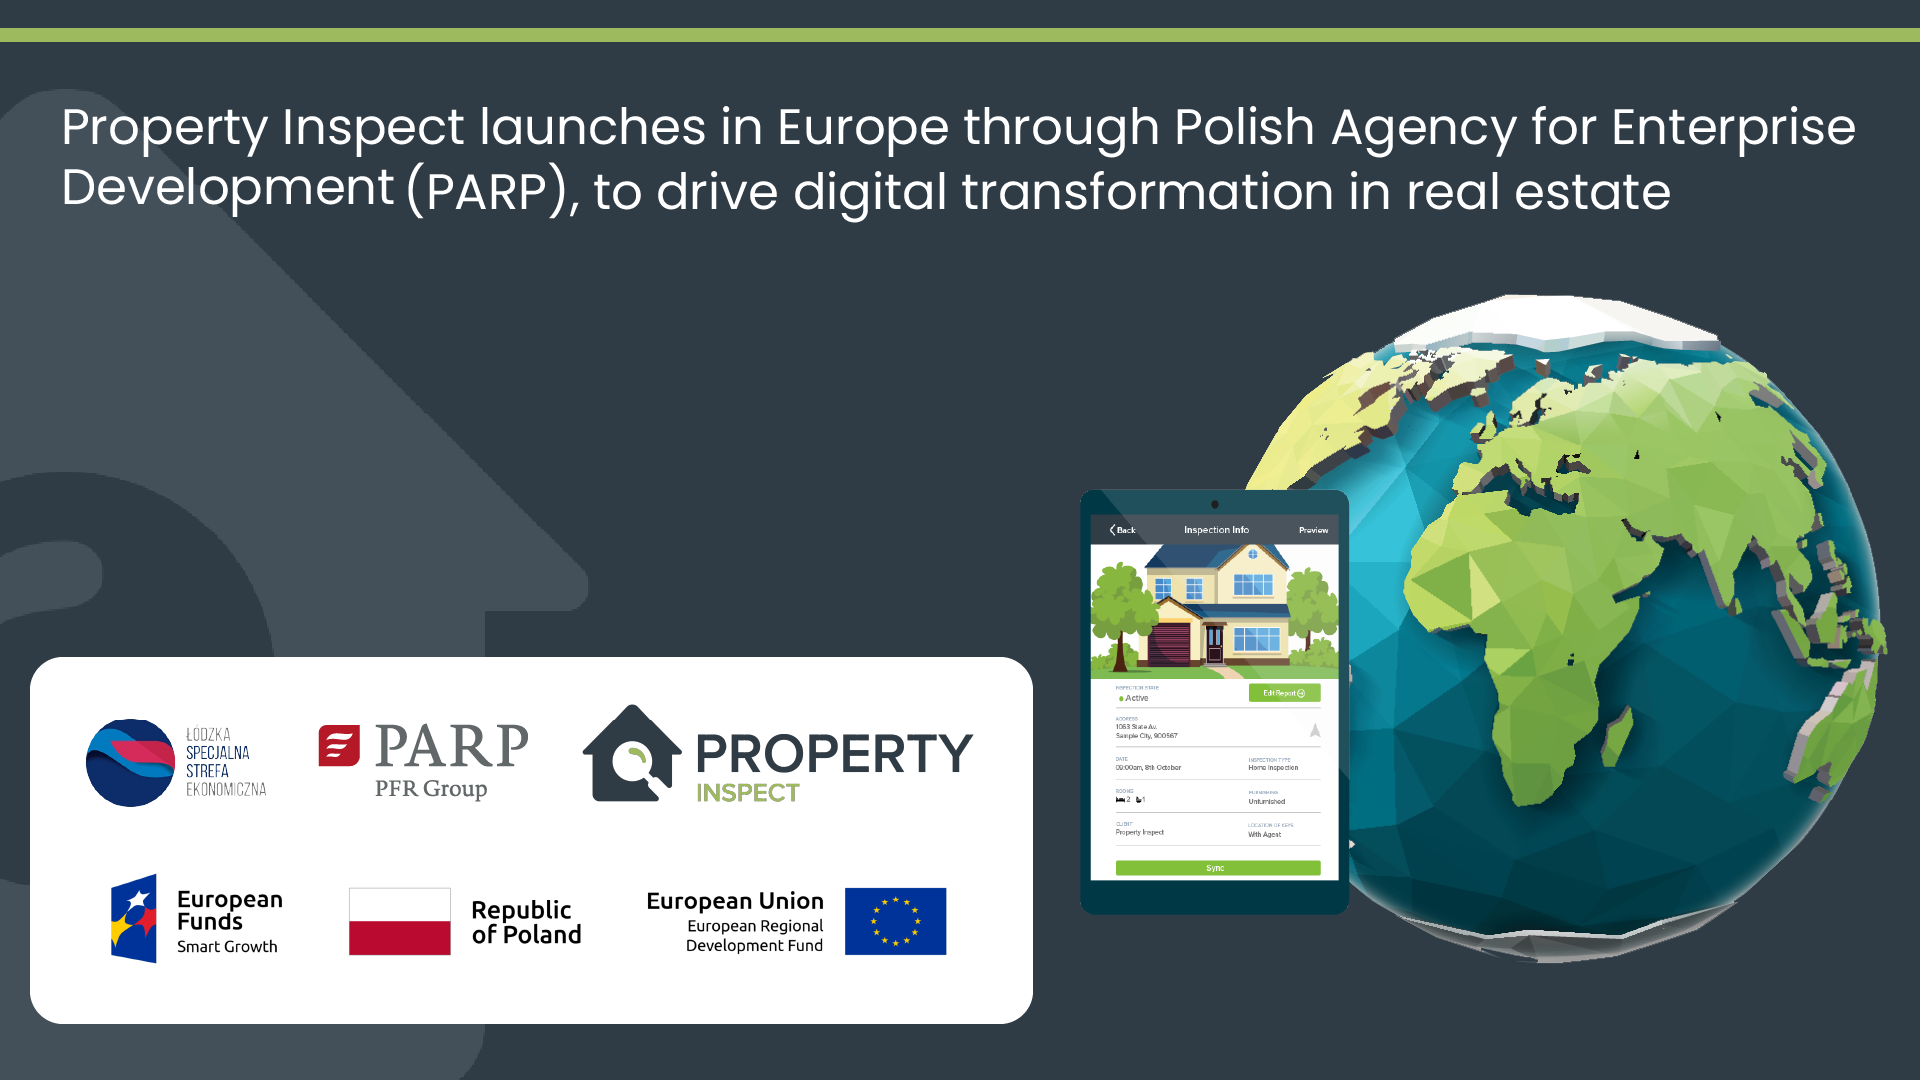 Property Inspect launches in Europe through Polish Agency for Enterprise Development (PARP), to drive digital transformation in real estate